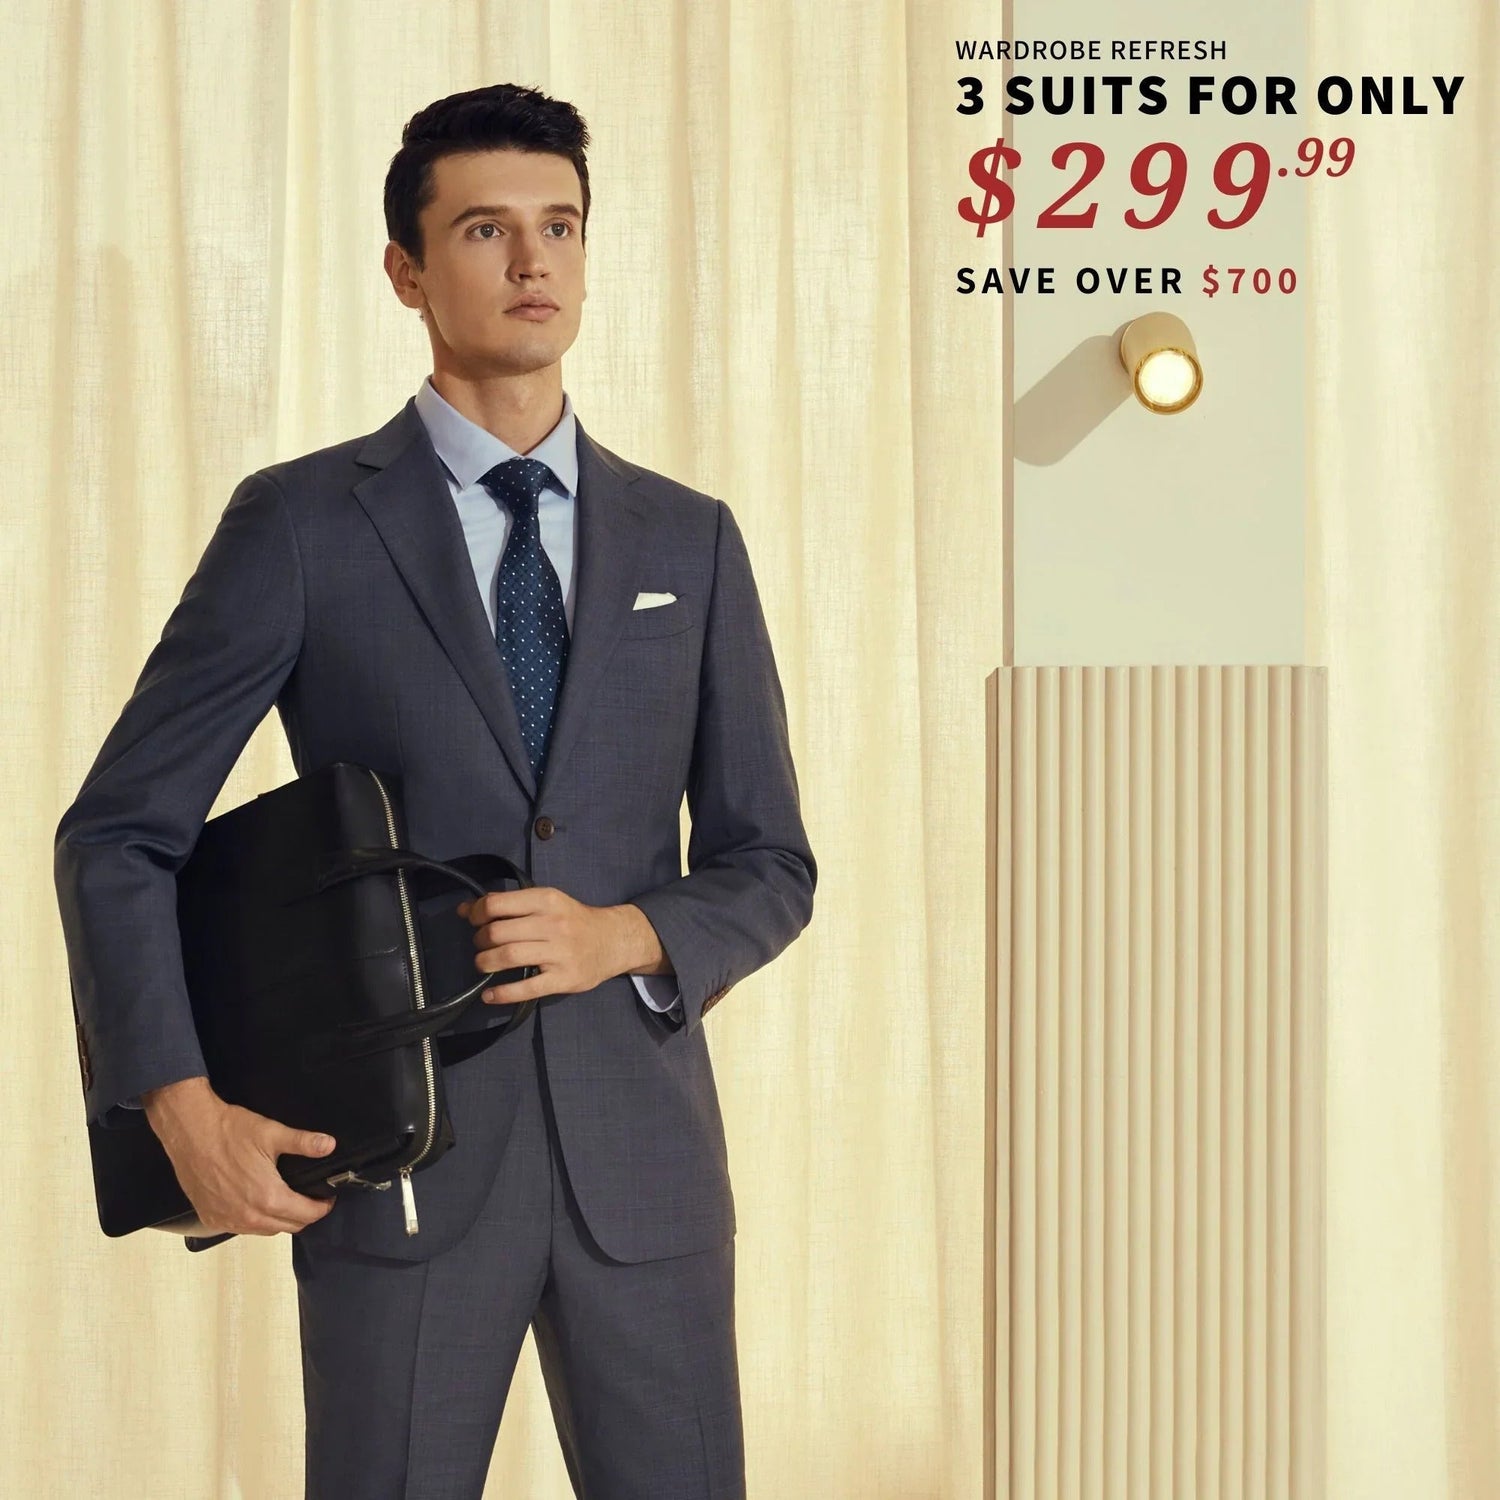 A man in a suit is holding a briefcase, wearing an unhemmed BYOB 3 Suits for $299 jacket.